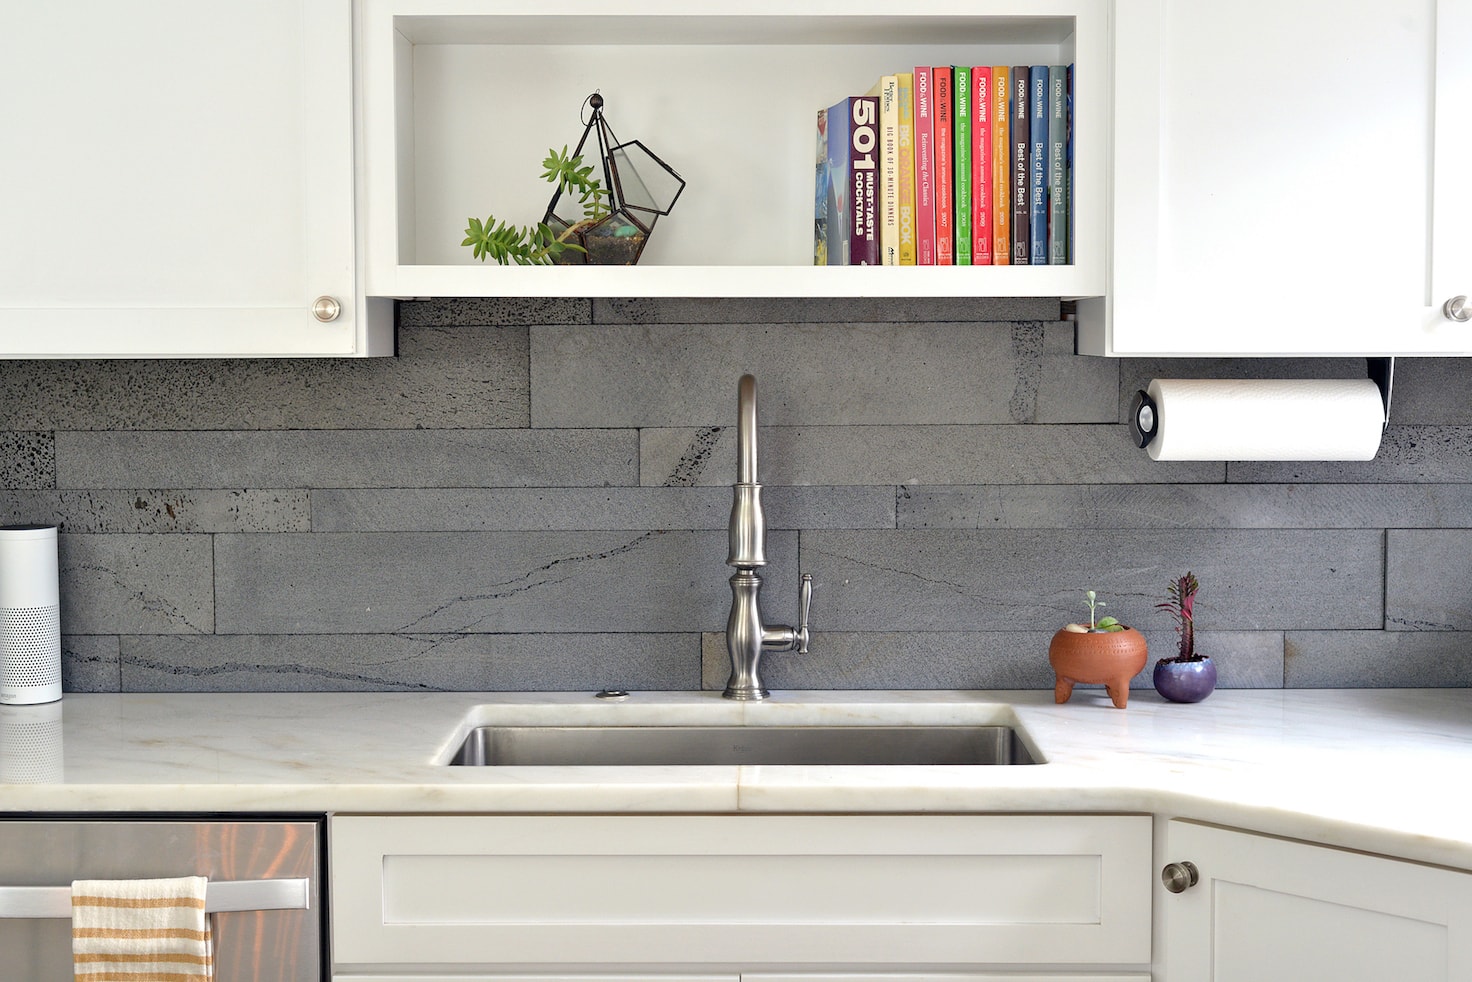 Norstone Lava Stone Planc in Platinum color used on a modern kitchen backsplash with cabinets and a marble countertop